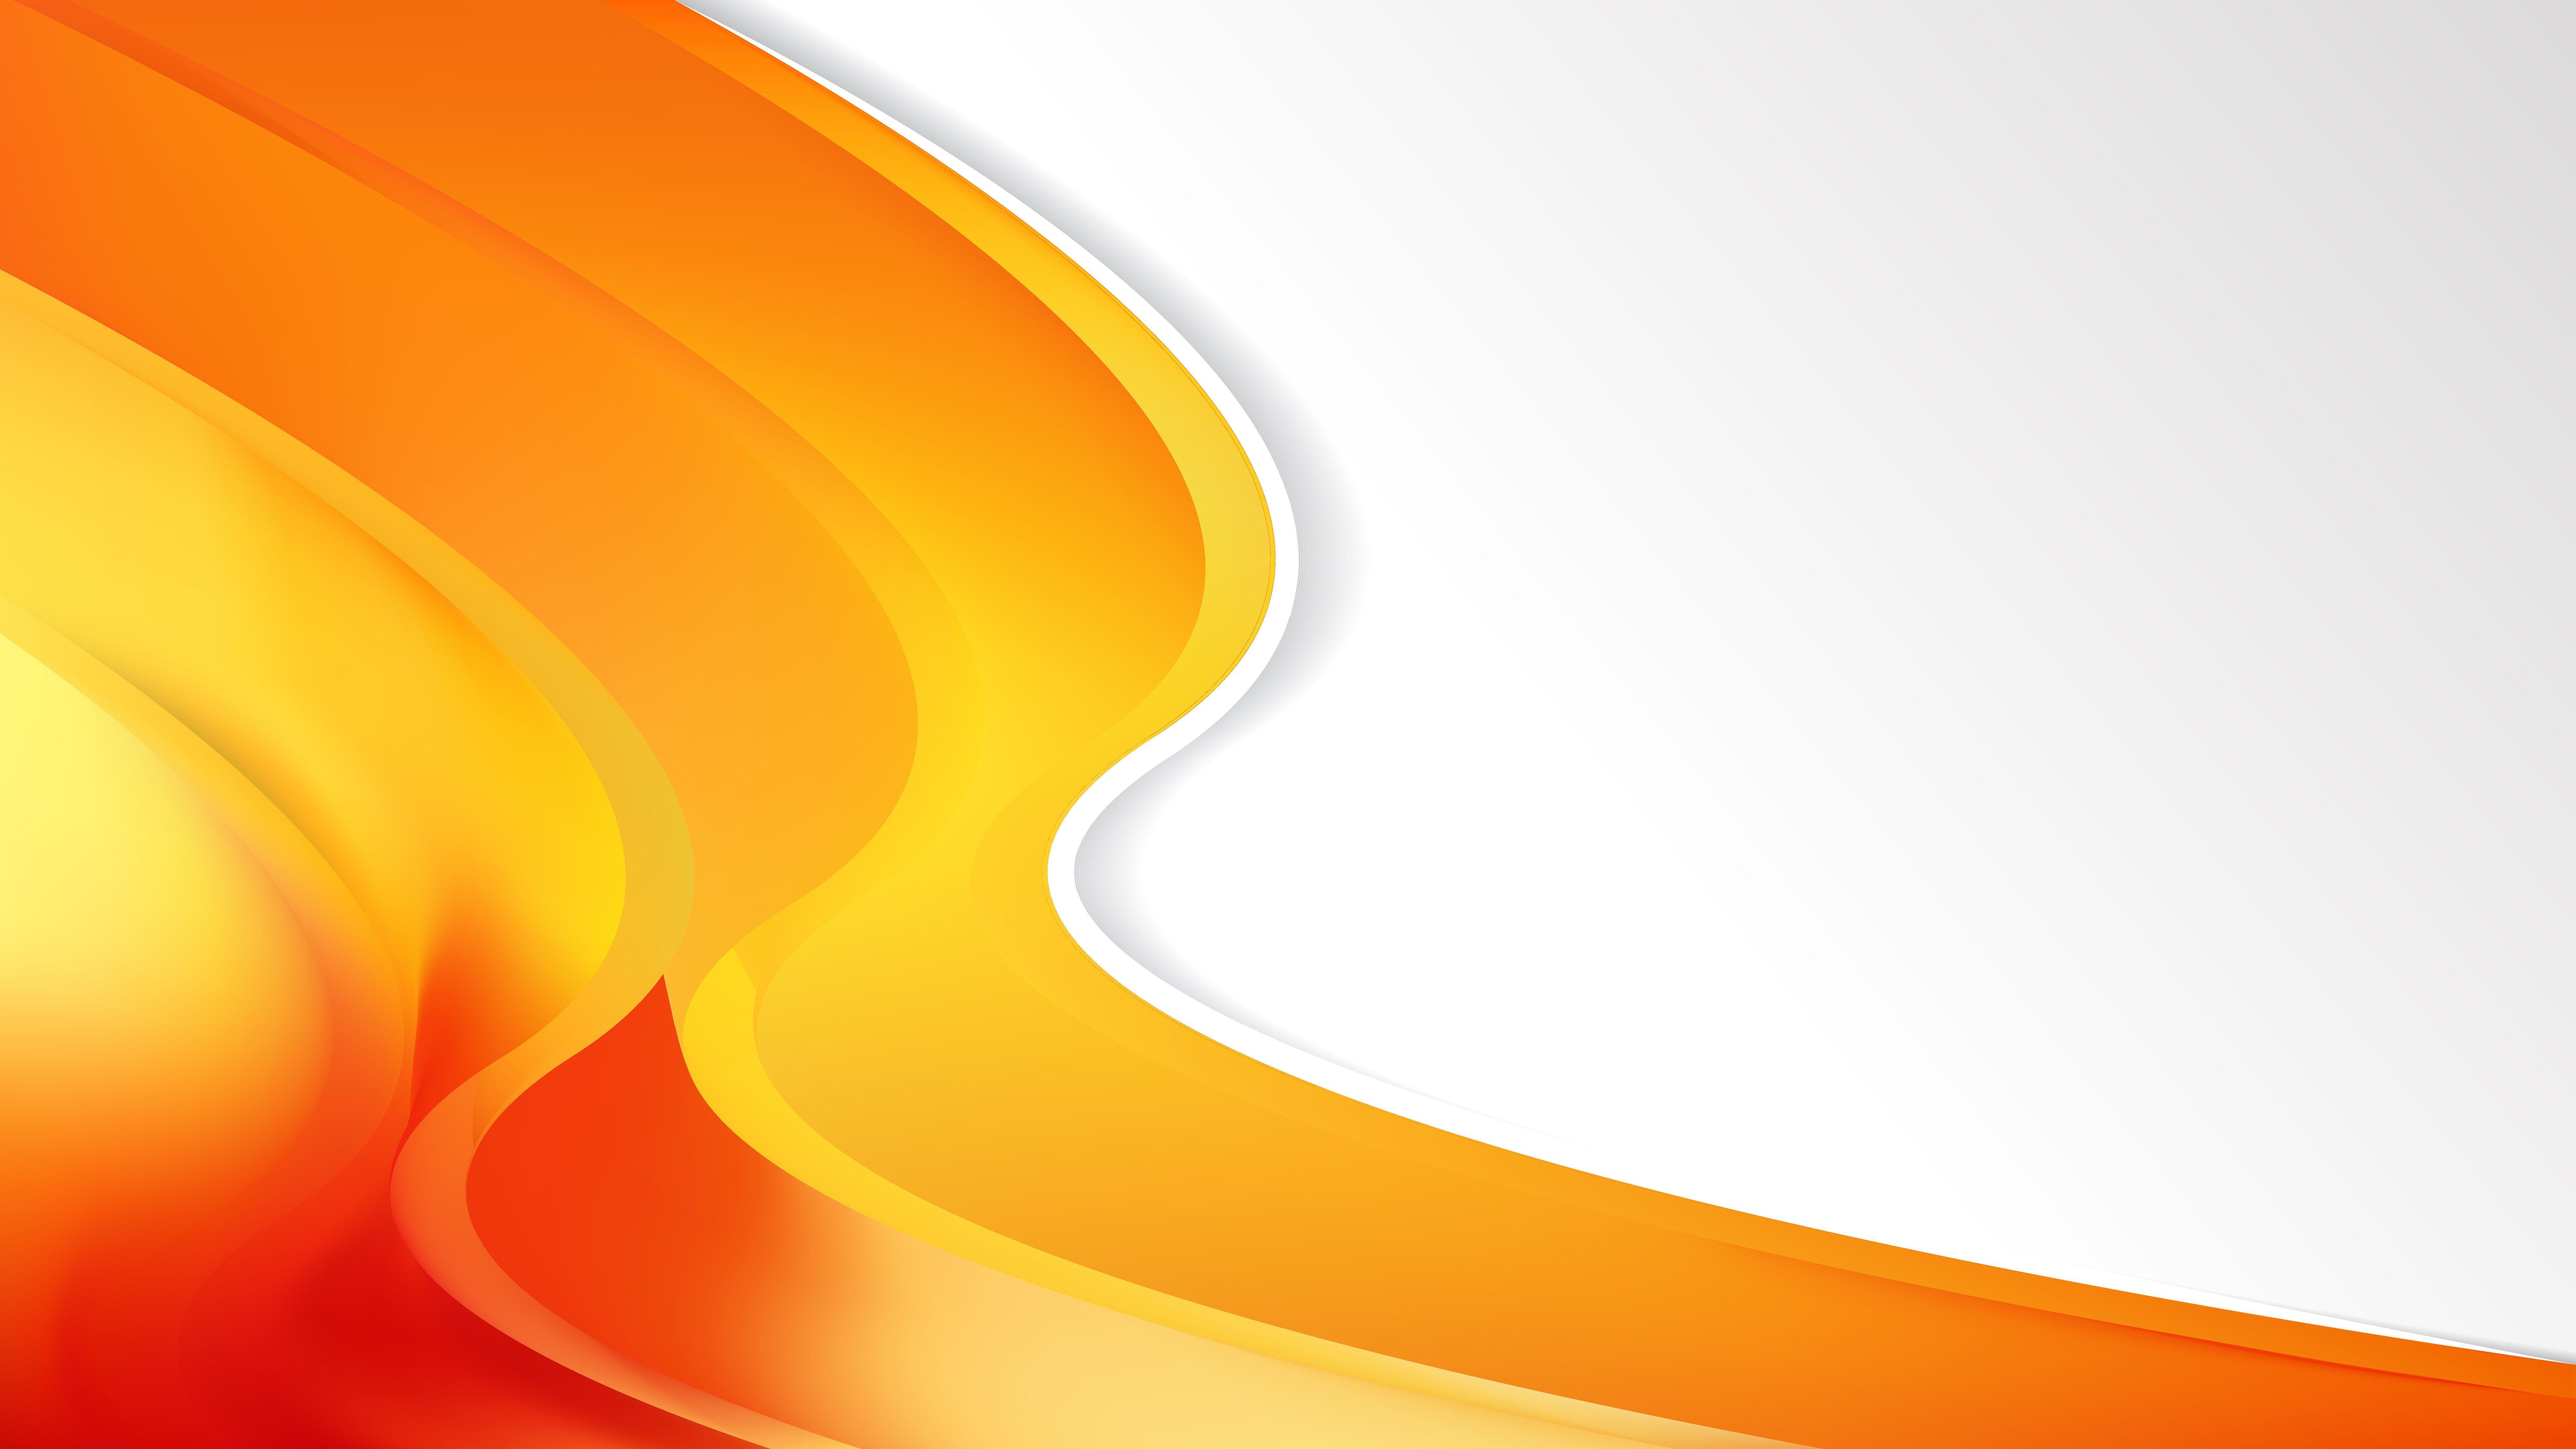 Red and Orange Wave Logo - 240+ Red and Orange Background Vectors | Download Free Vector Art ...